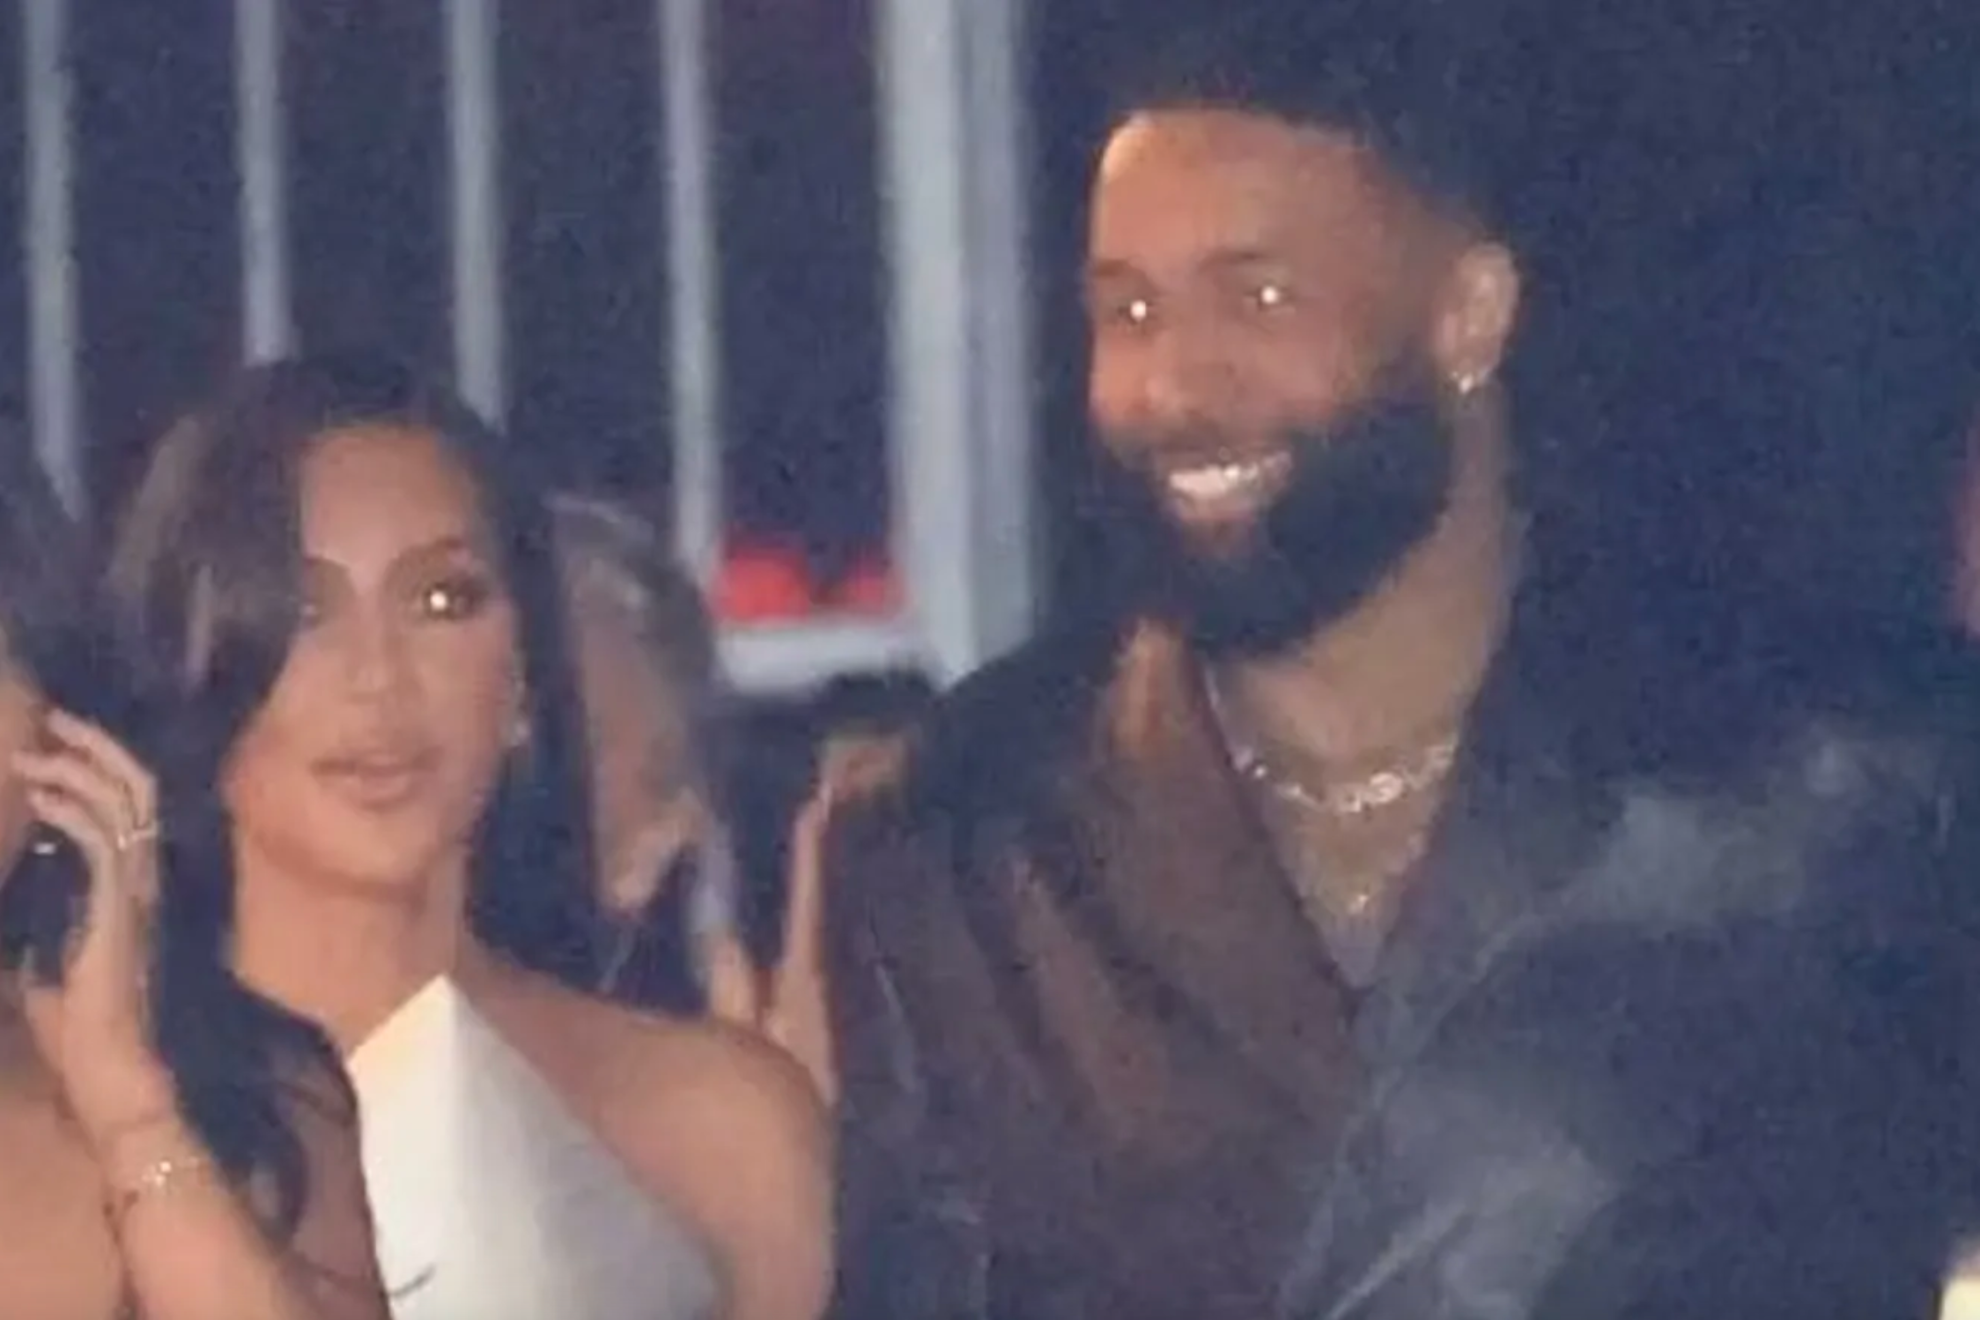 Kim Kardashian and Odell Beckham Jr. together at Oscars party: Relationship rumors are growing